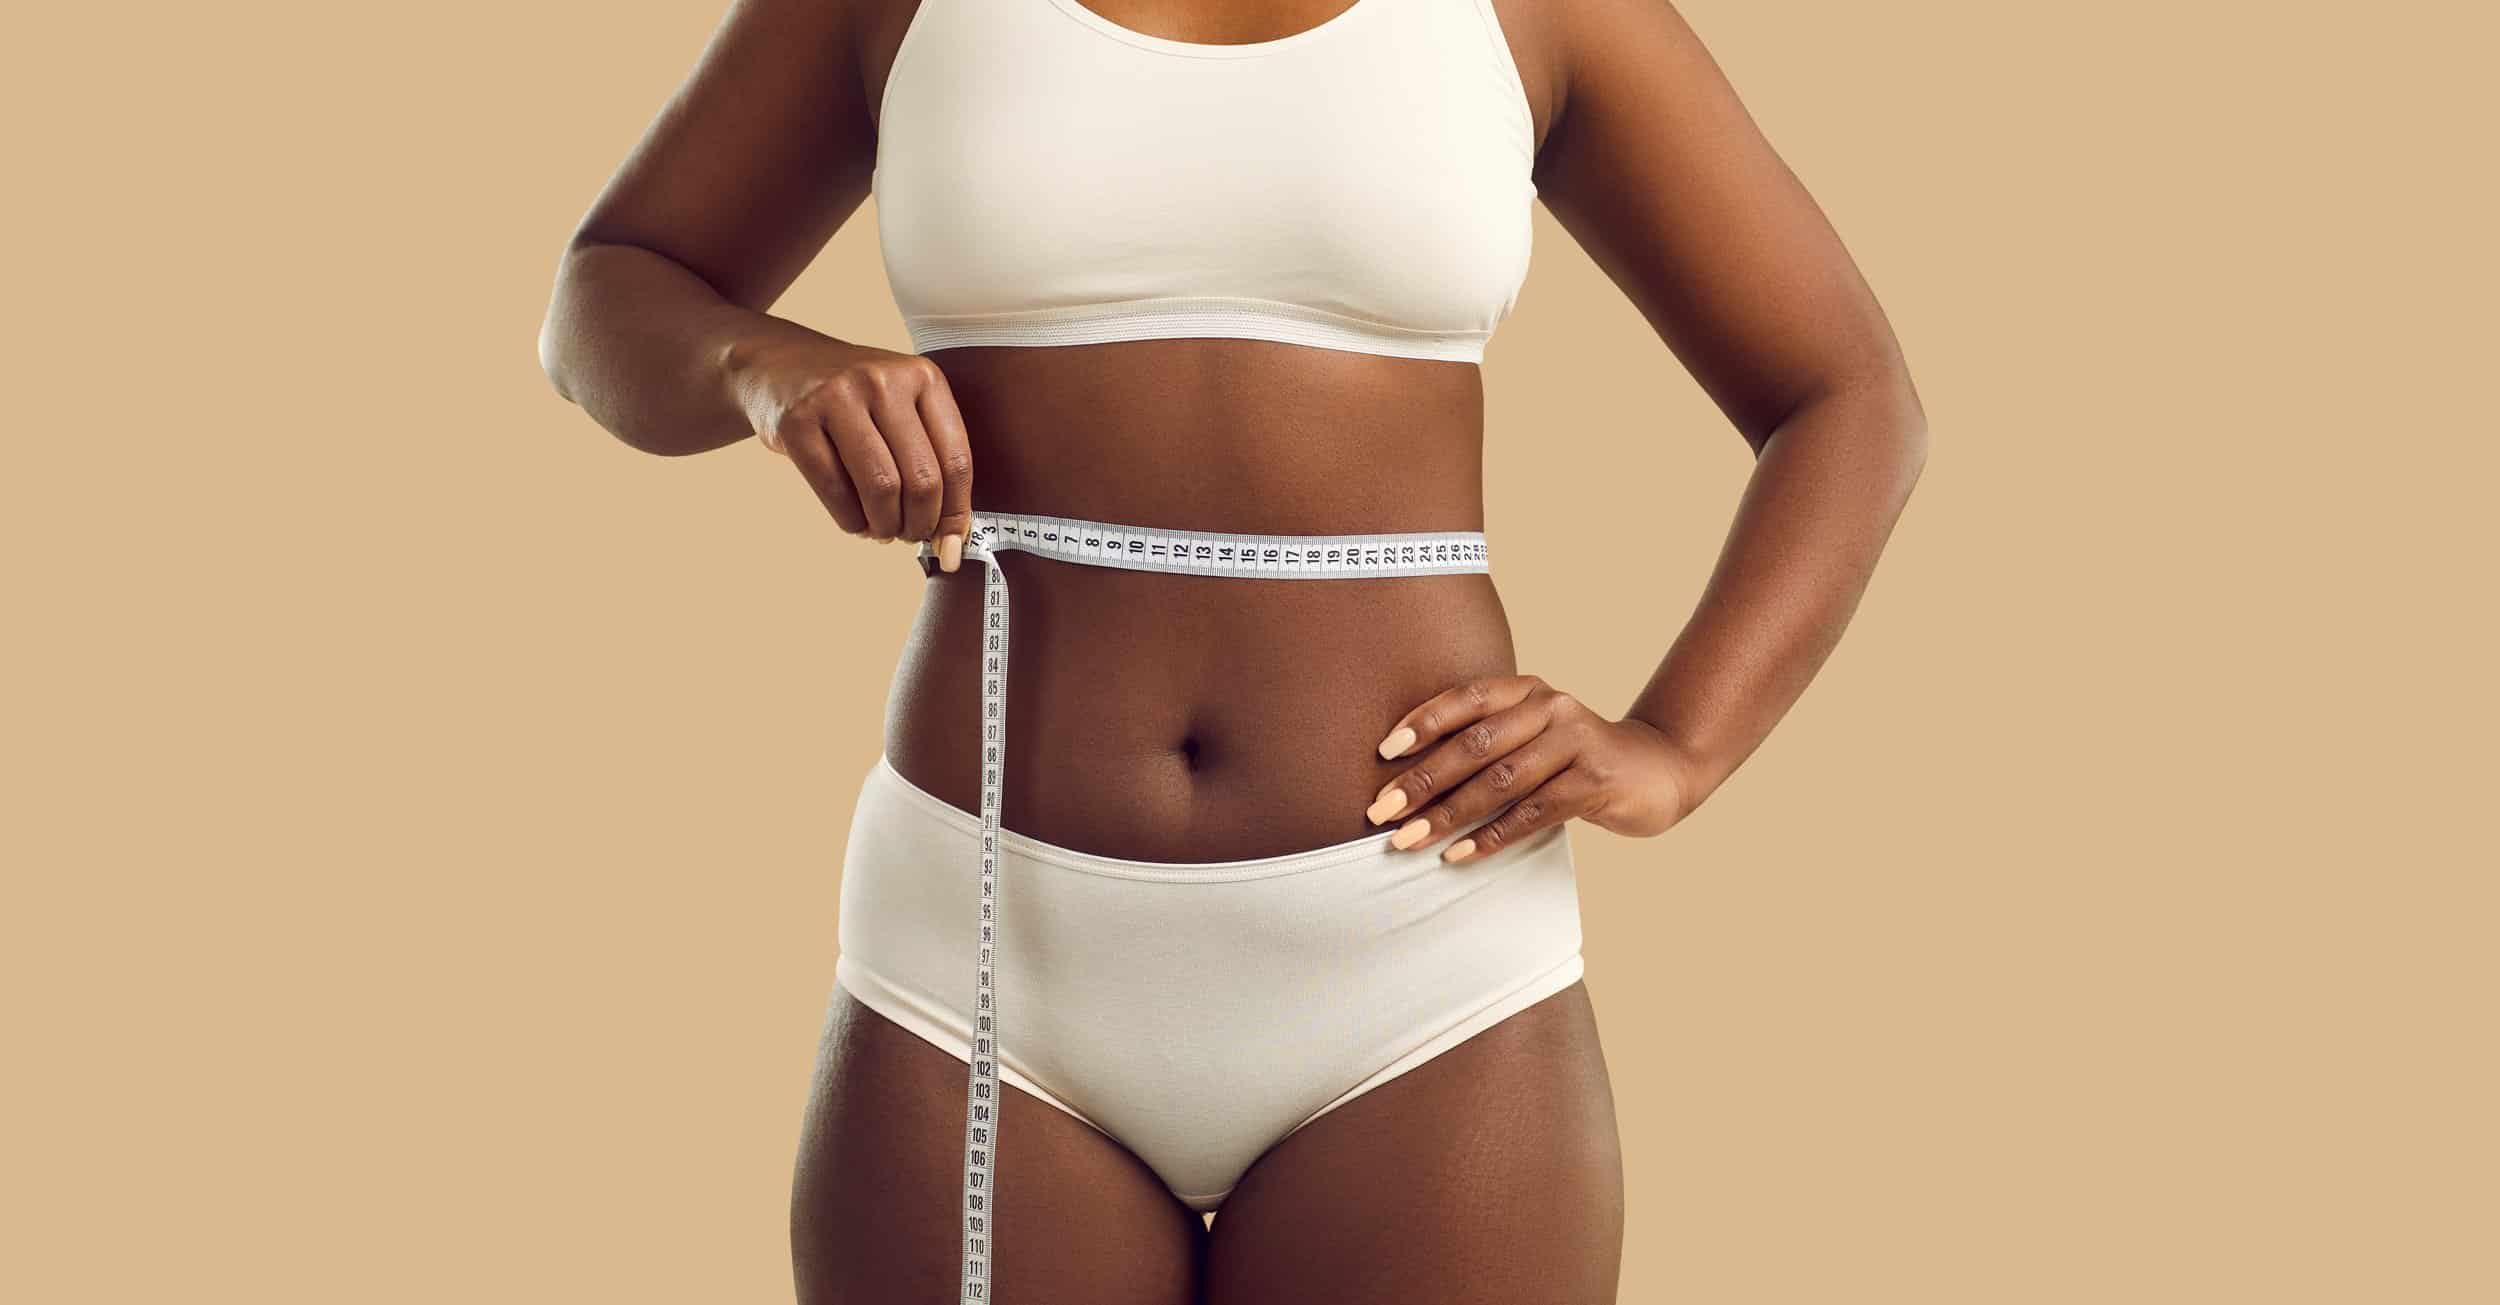 Plus size young black woman with belly fat measuring her waist with tape measure